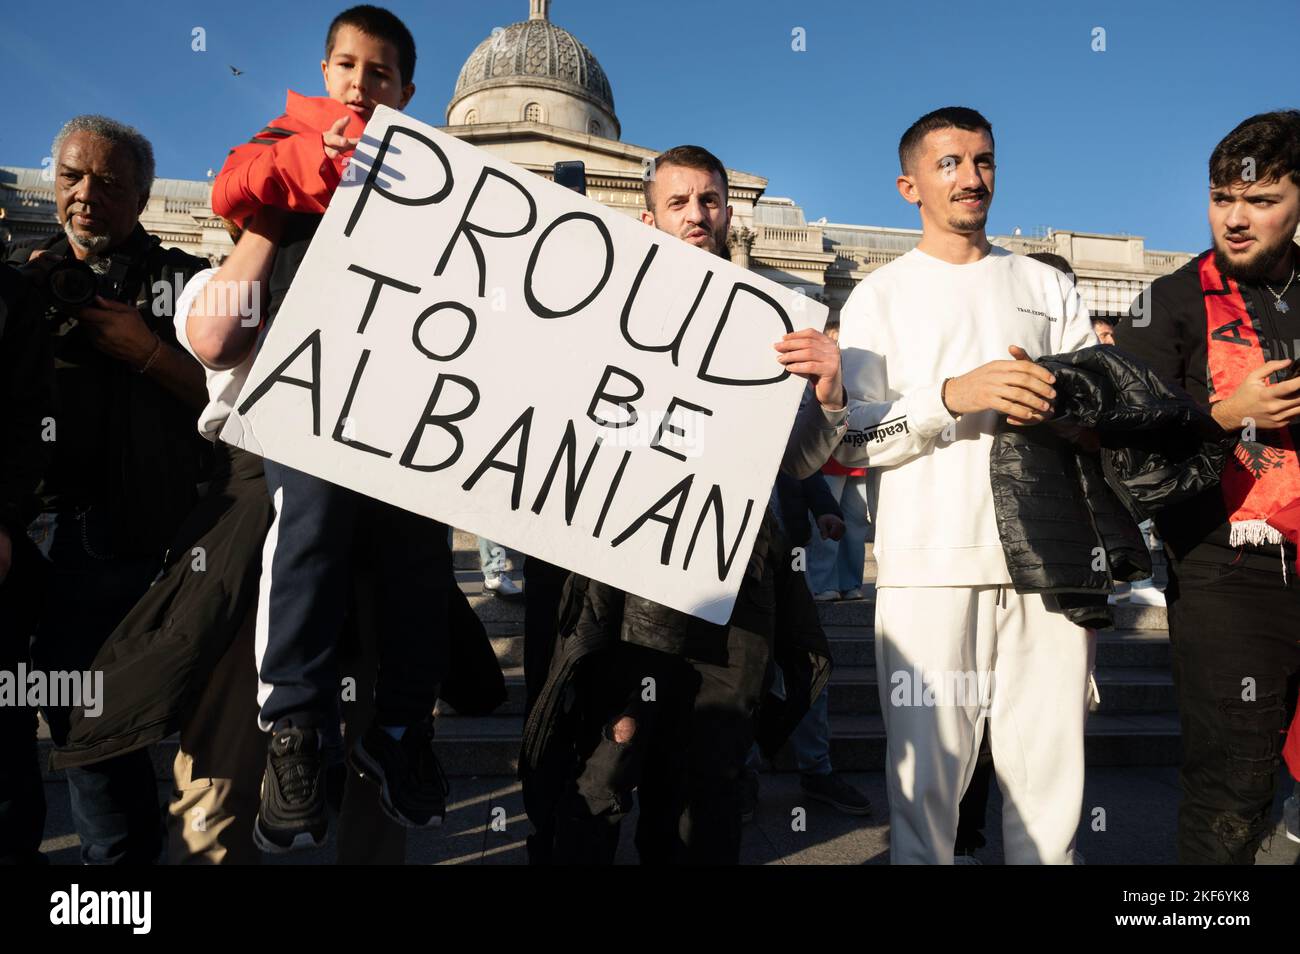 On November 12th 2022 Albanians demonstrated in Central London against comments from Suella Braverman, the Home Secretary, criminalising them. Stock Photo